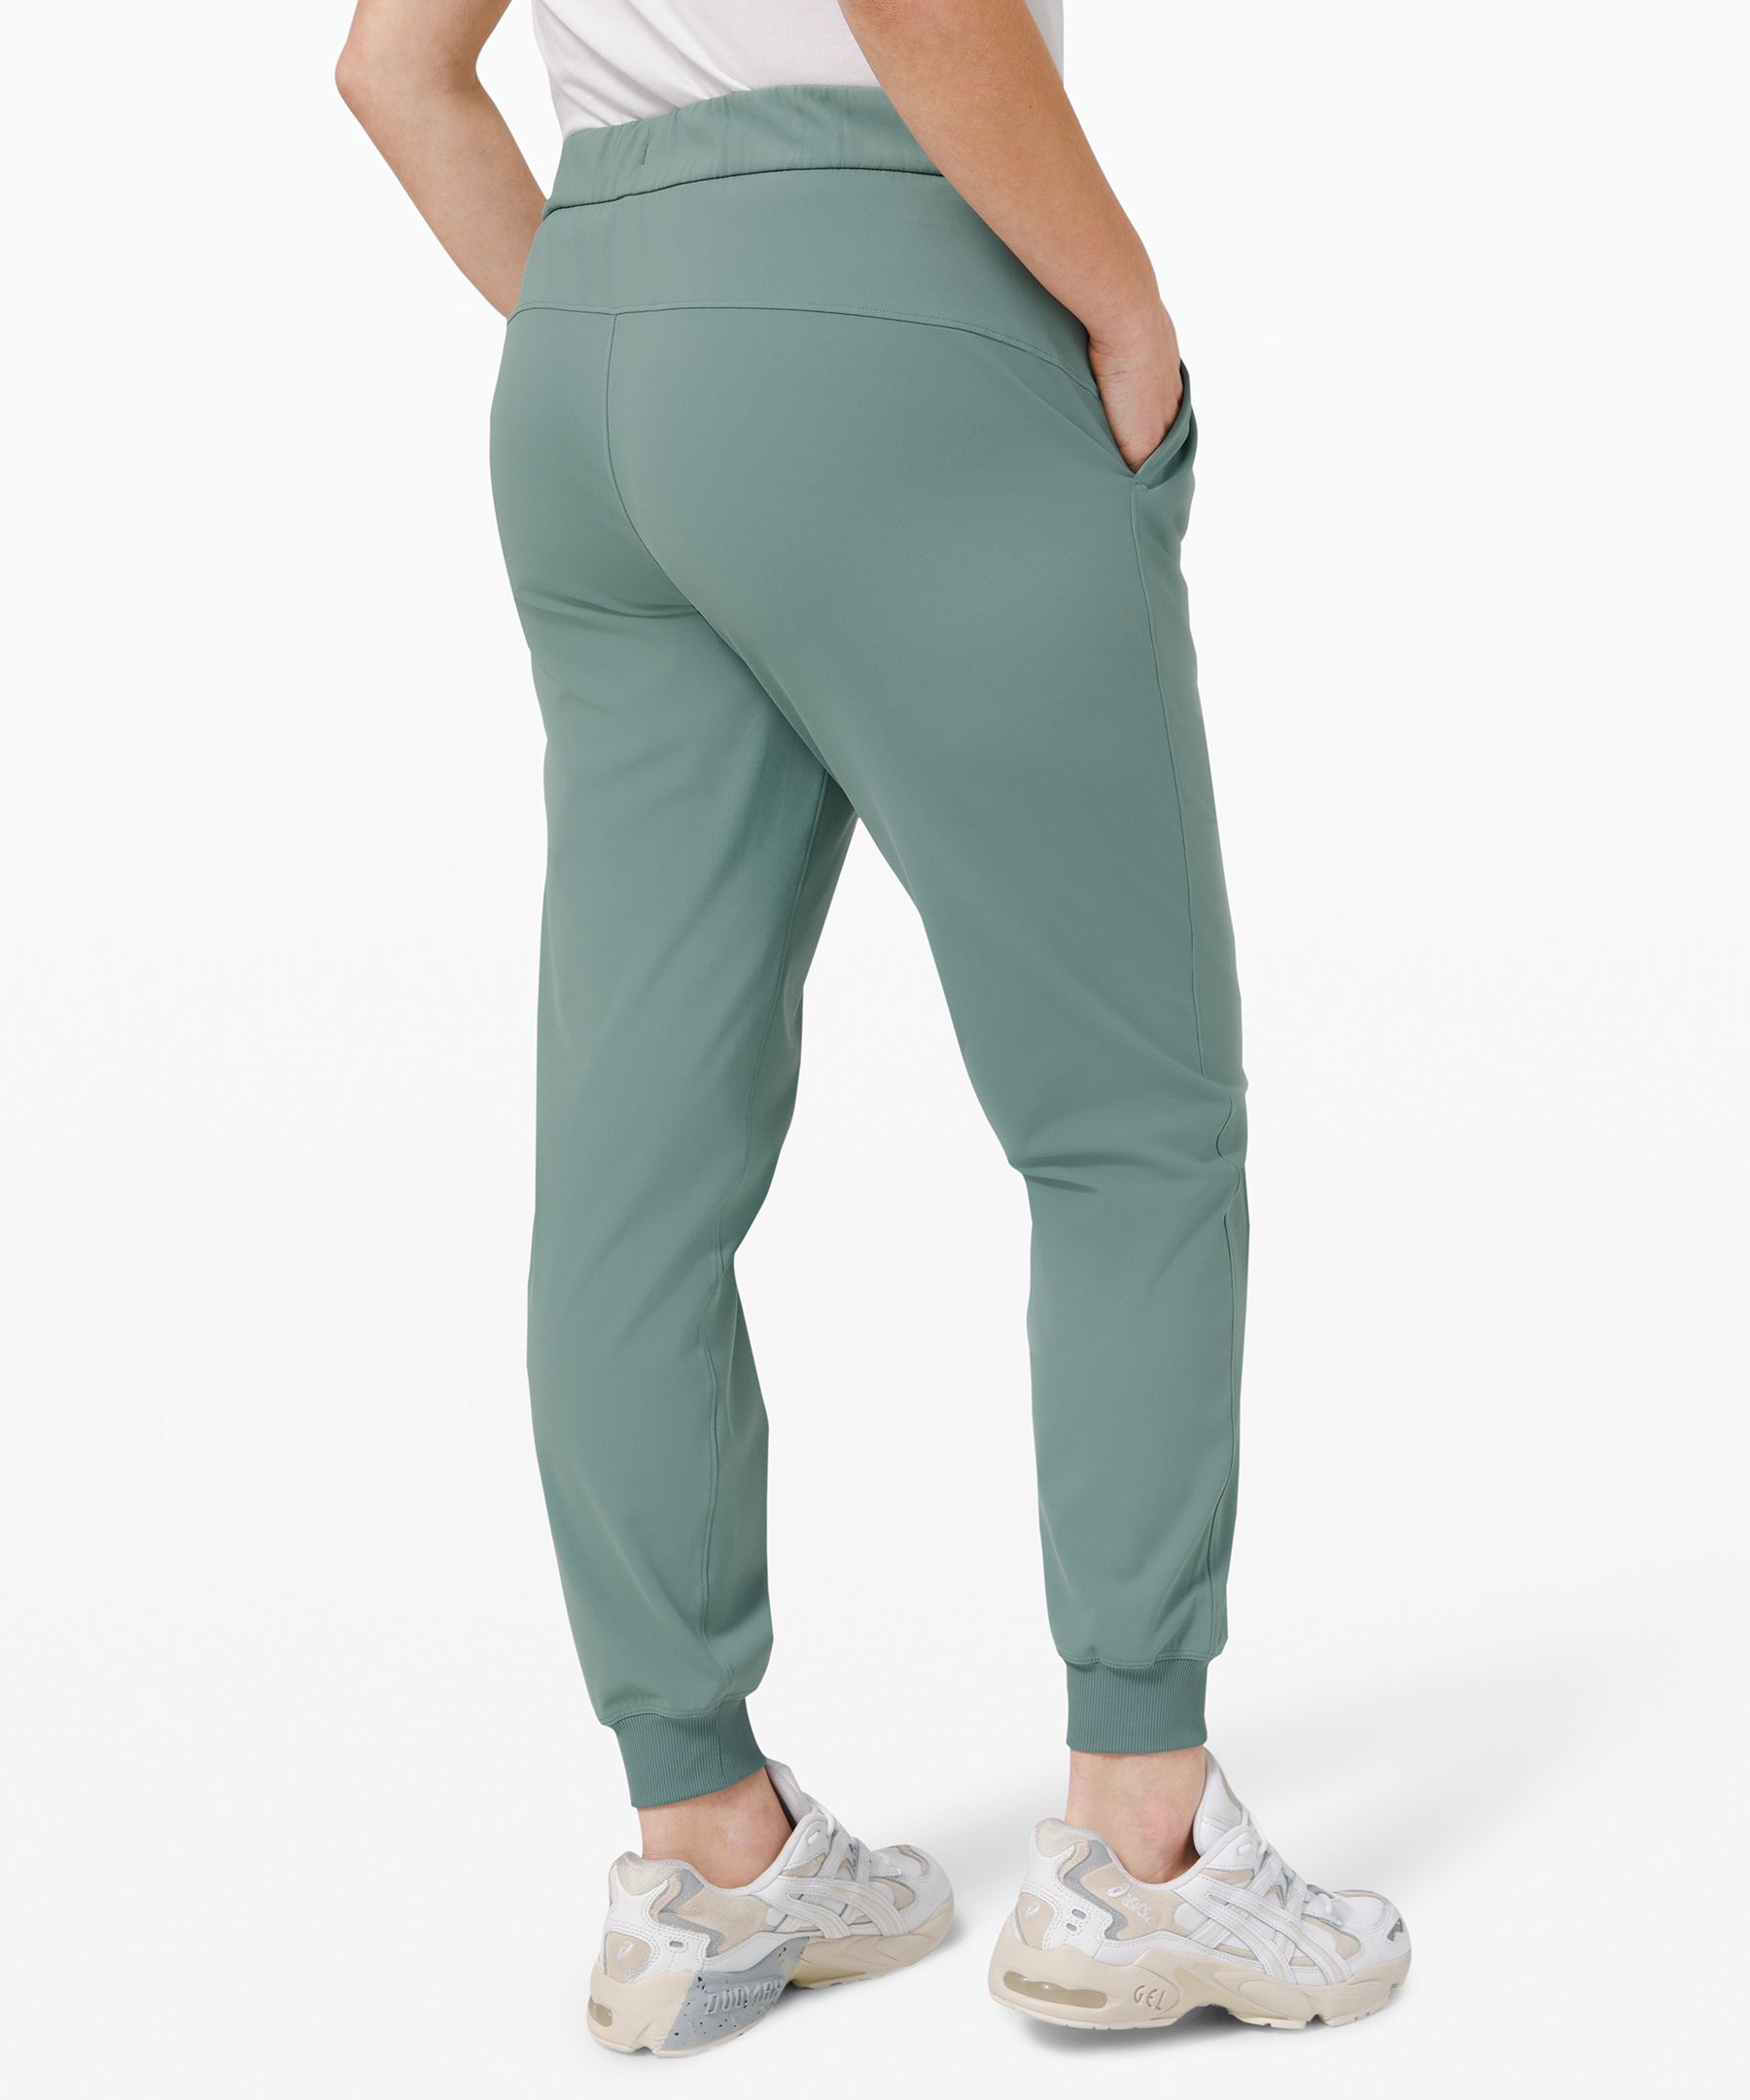 Lululemon On The Fly Jogger Discontinued Video Gamejolt